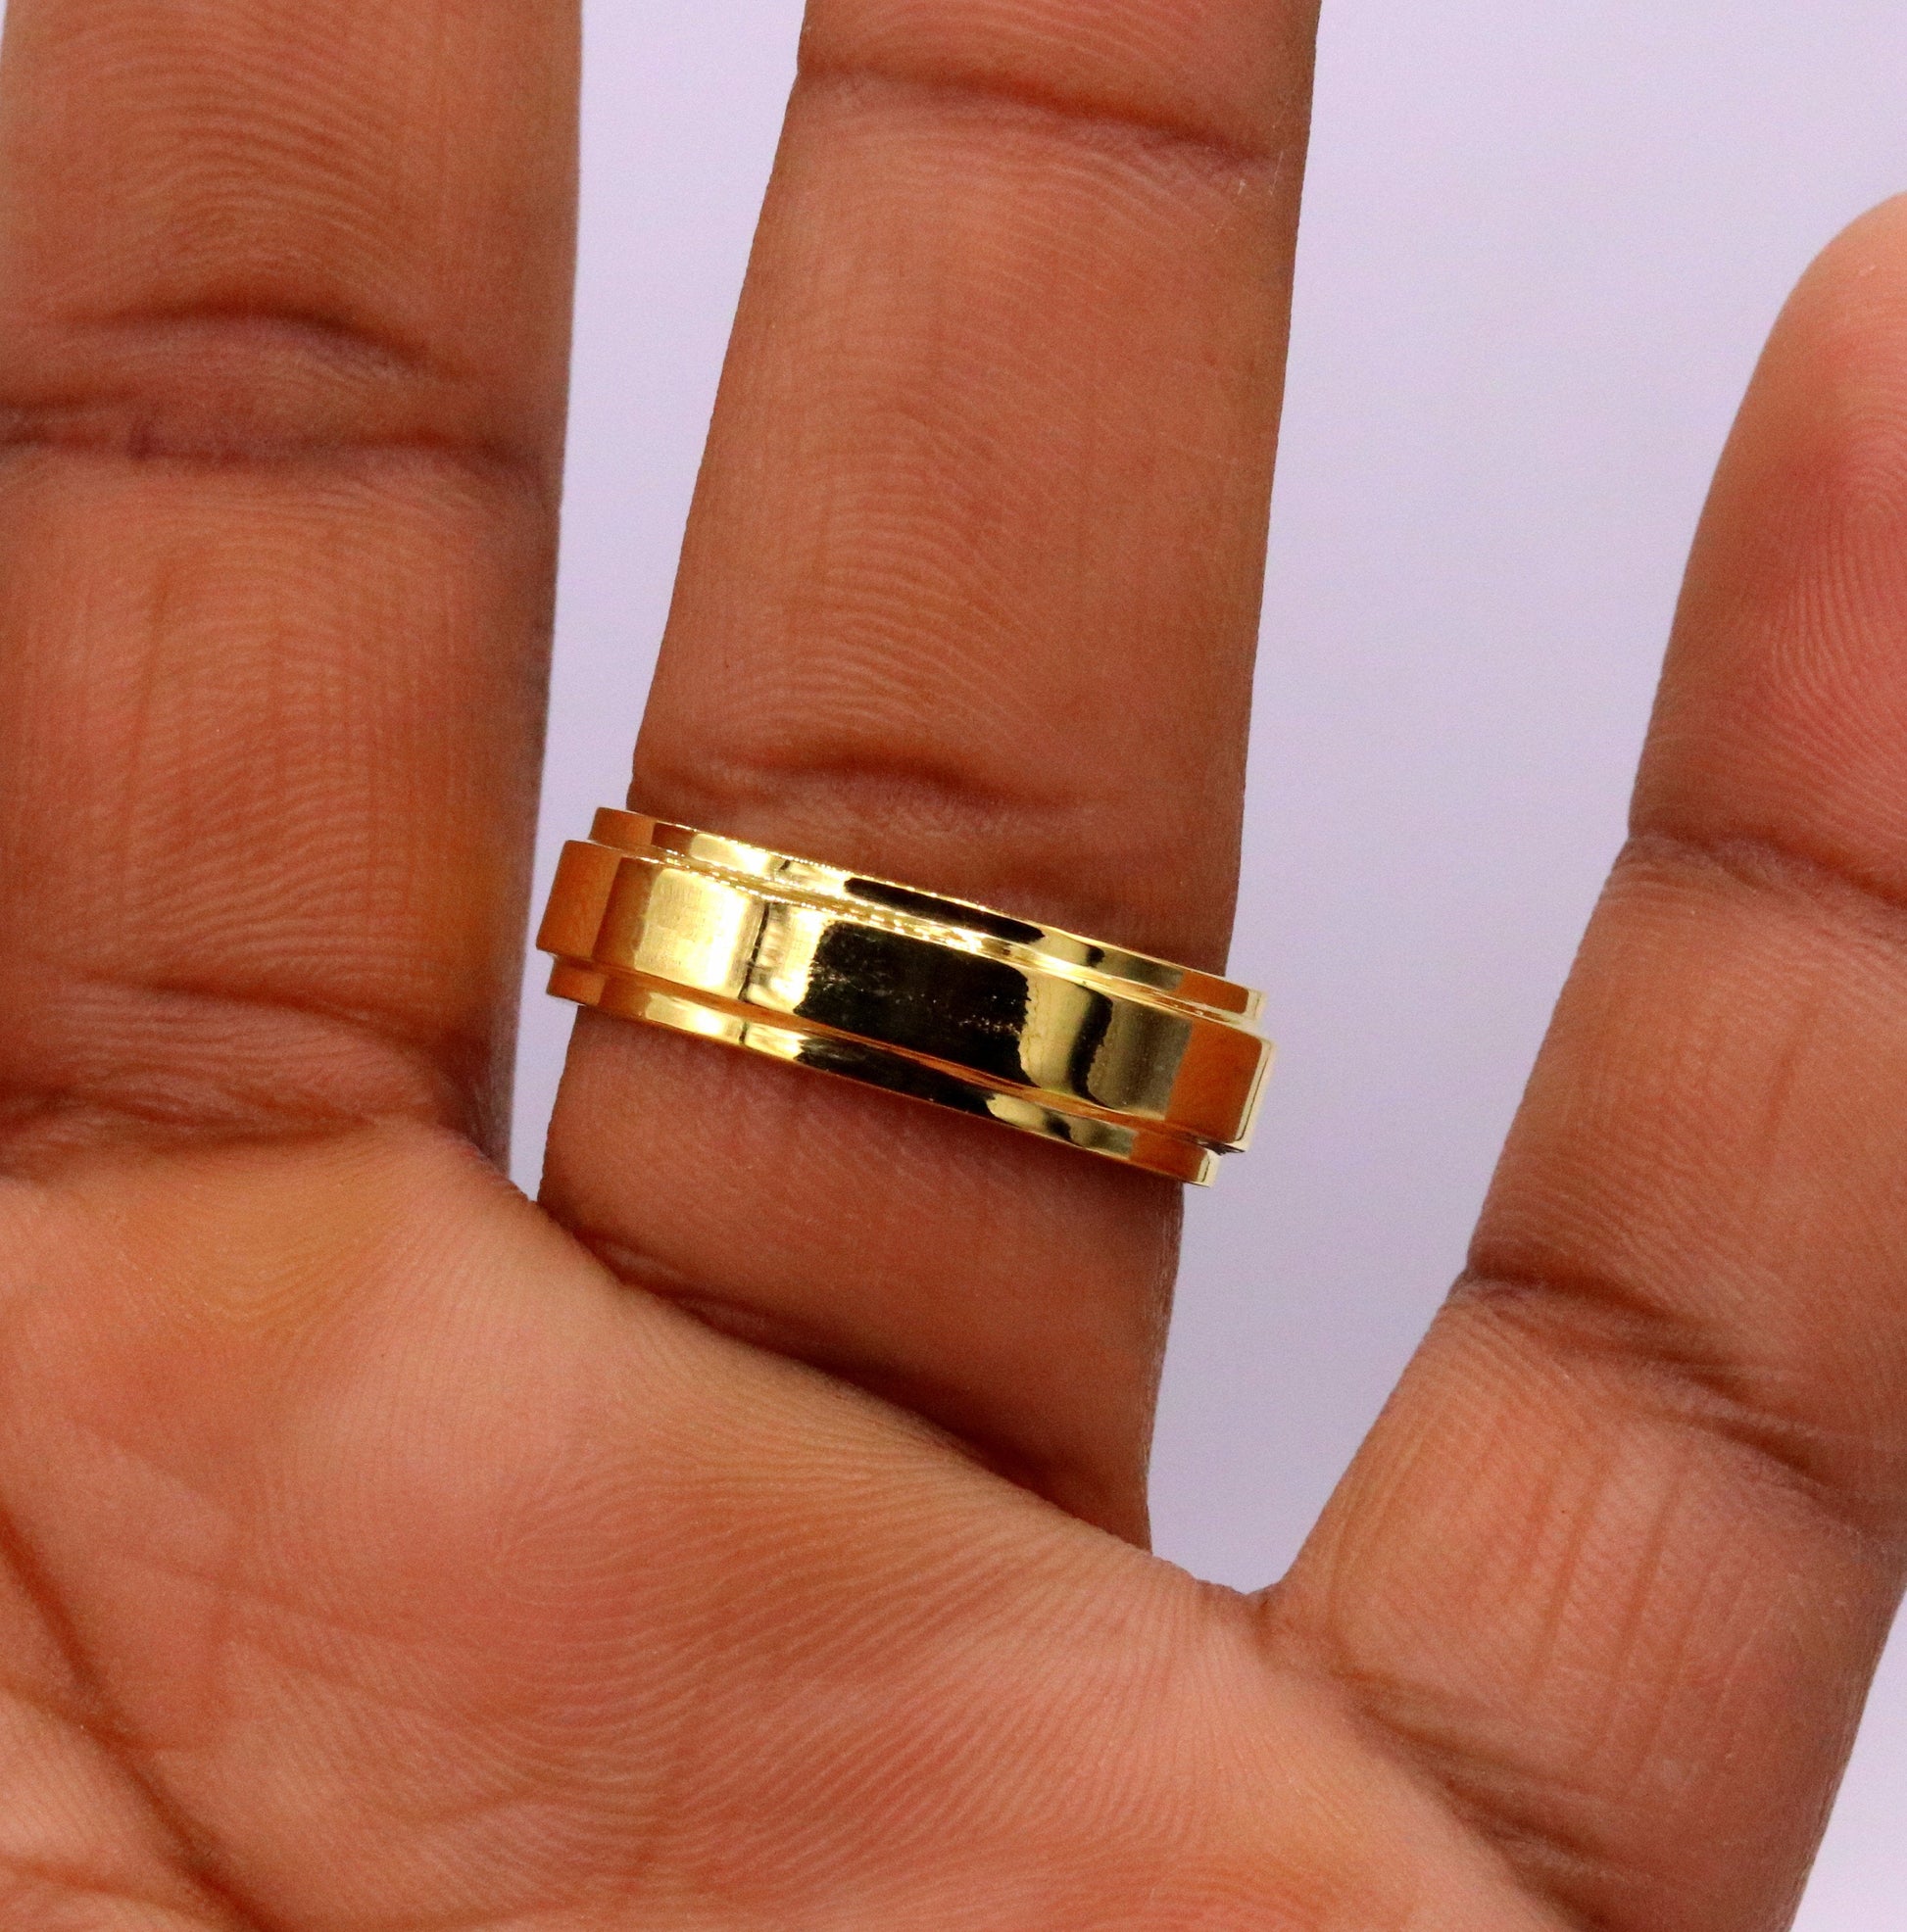 18 kt yellow gold handmade fabulous wedding engagement anniversary ring band unisex jewelry all sizes available - TRIBAL ORNAMENTS